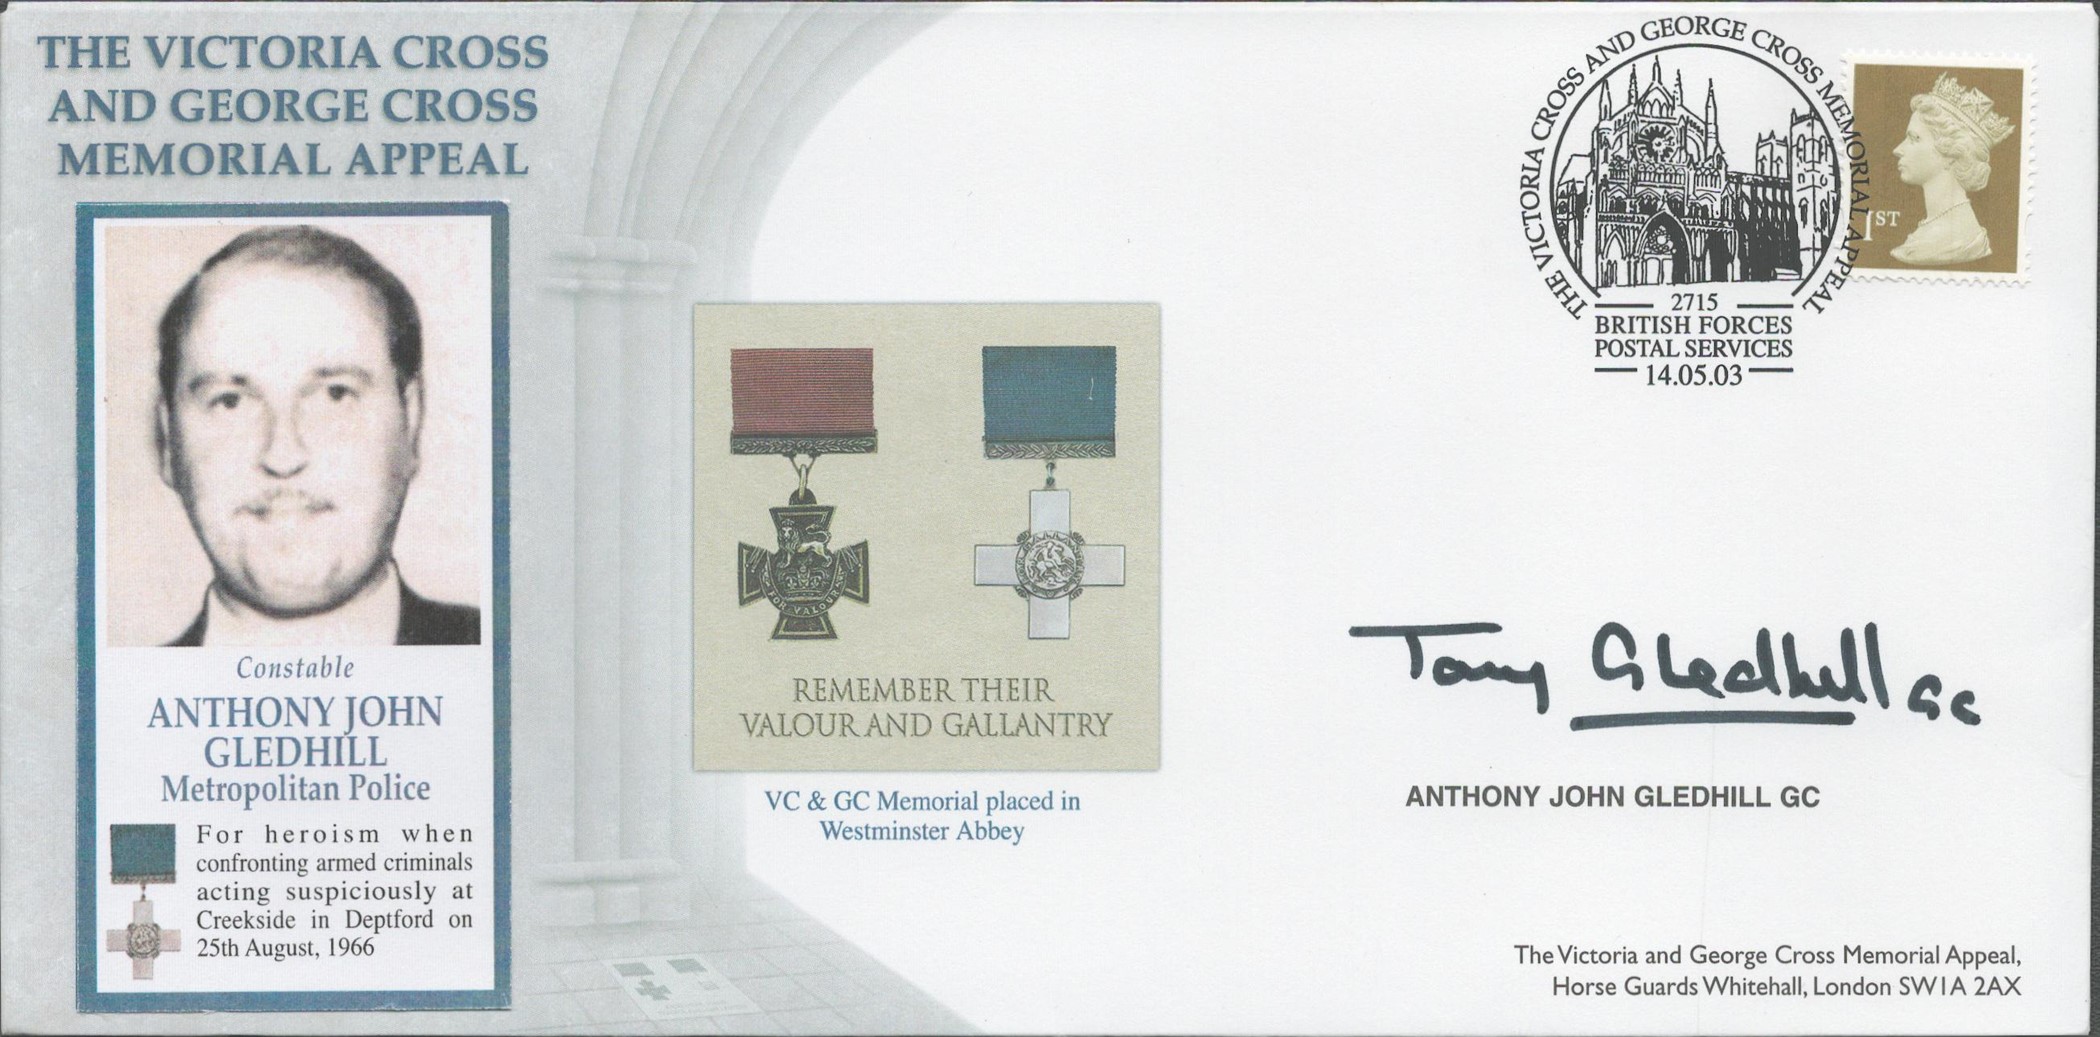 Tony Gledhill GC Signed Victoria Cross and George Cross Memorial Appeal FDC. British Stamp with